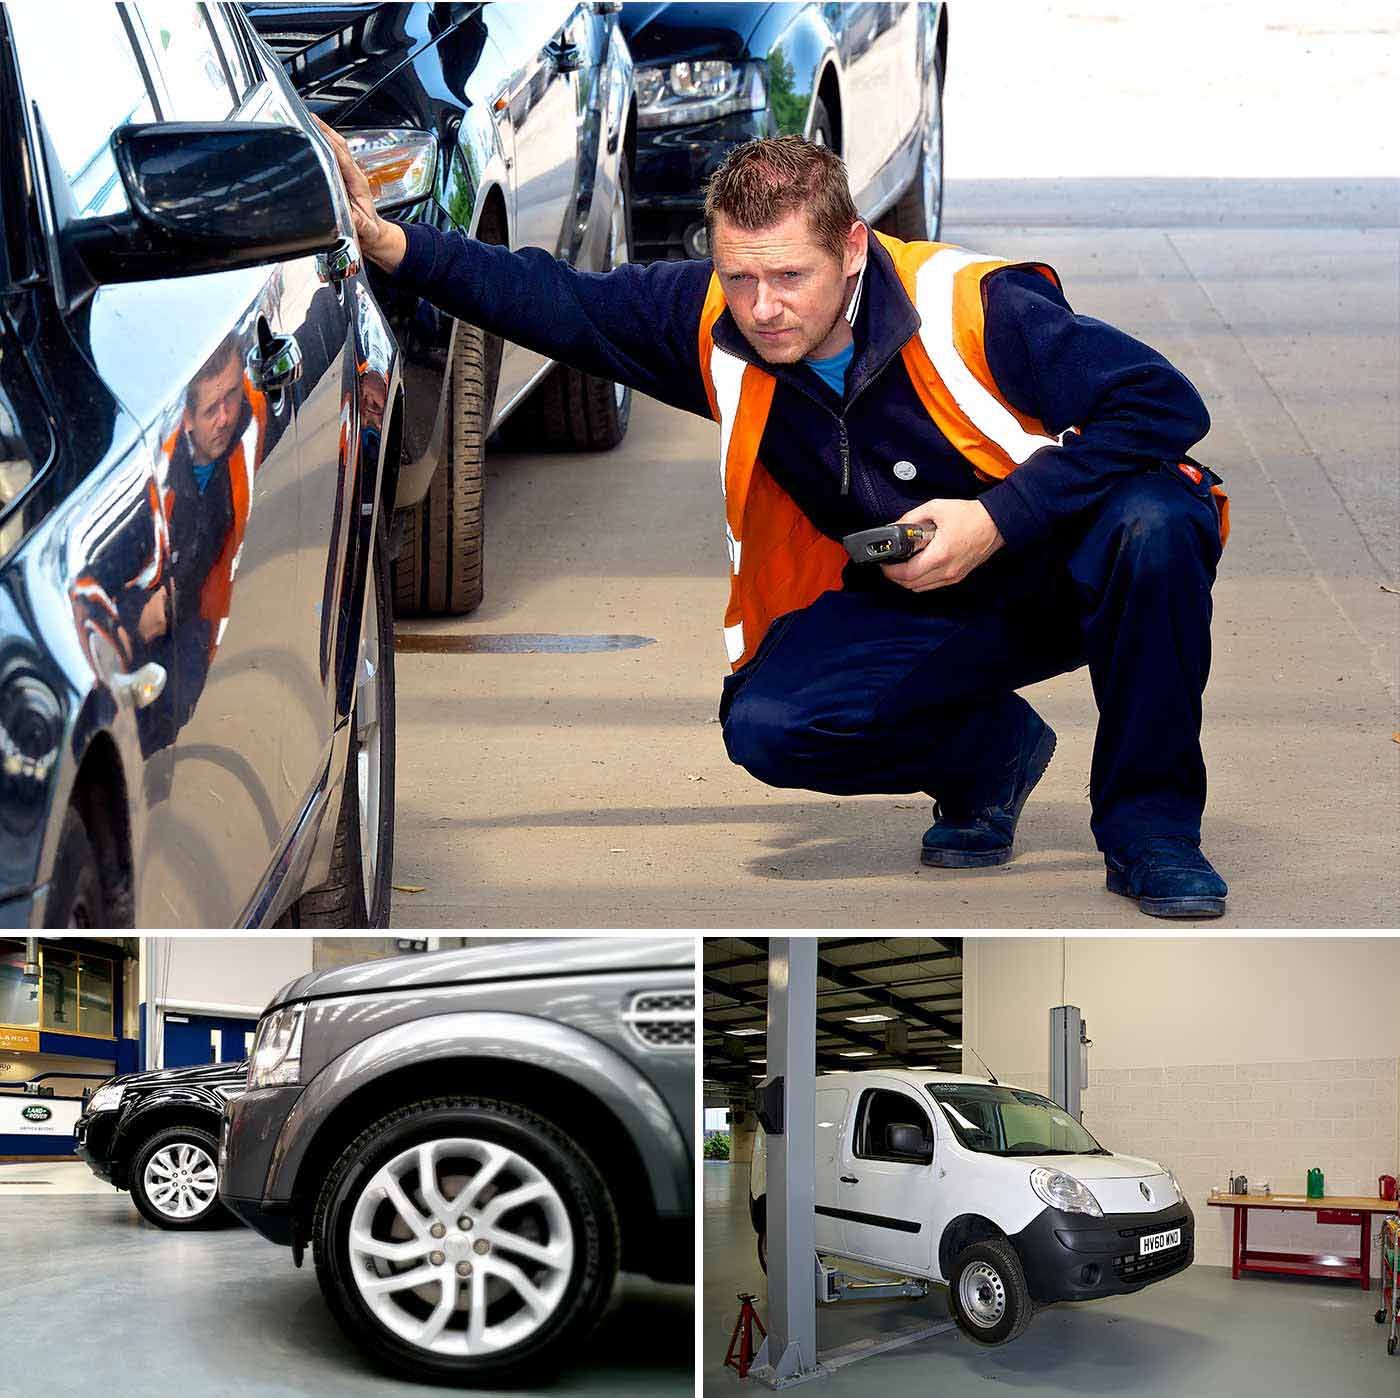 One of our staff inspecting a car, some Land Rovers and a van on a vehicle lift